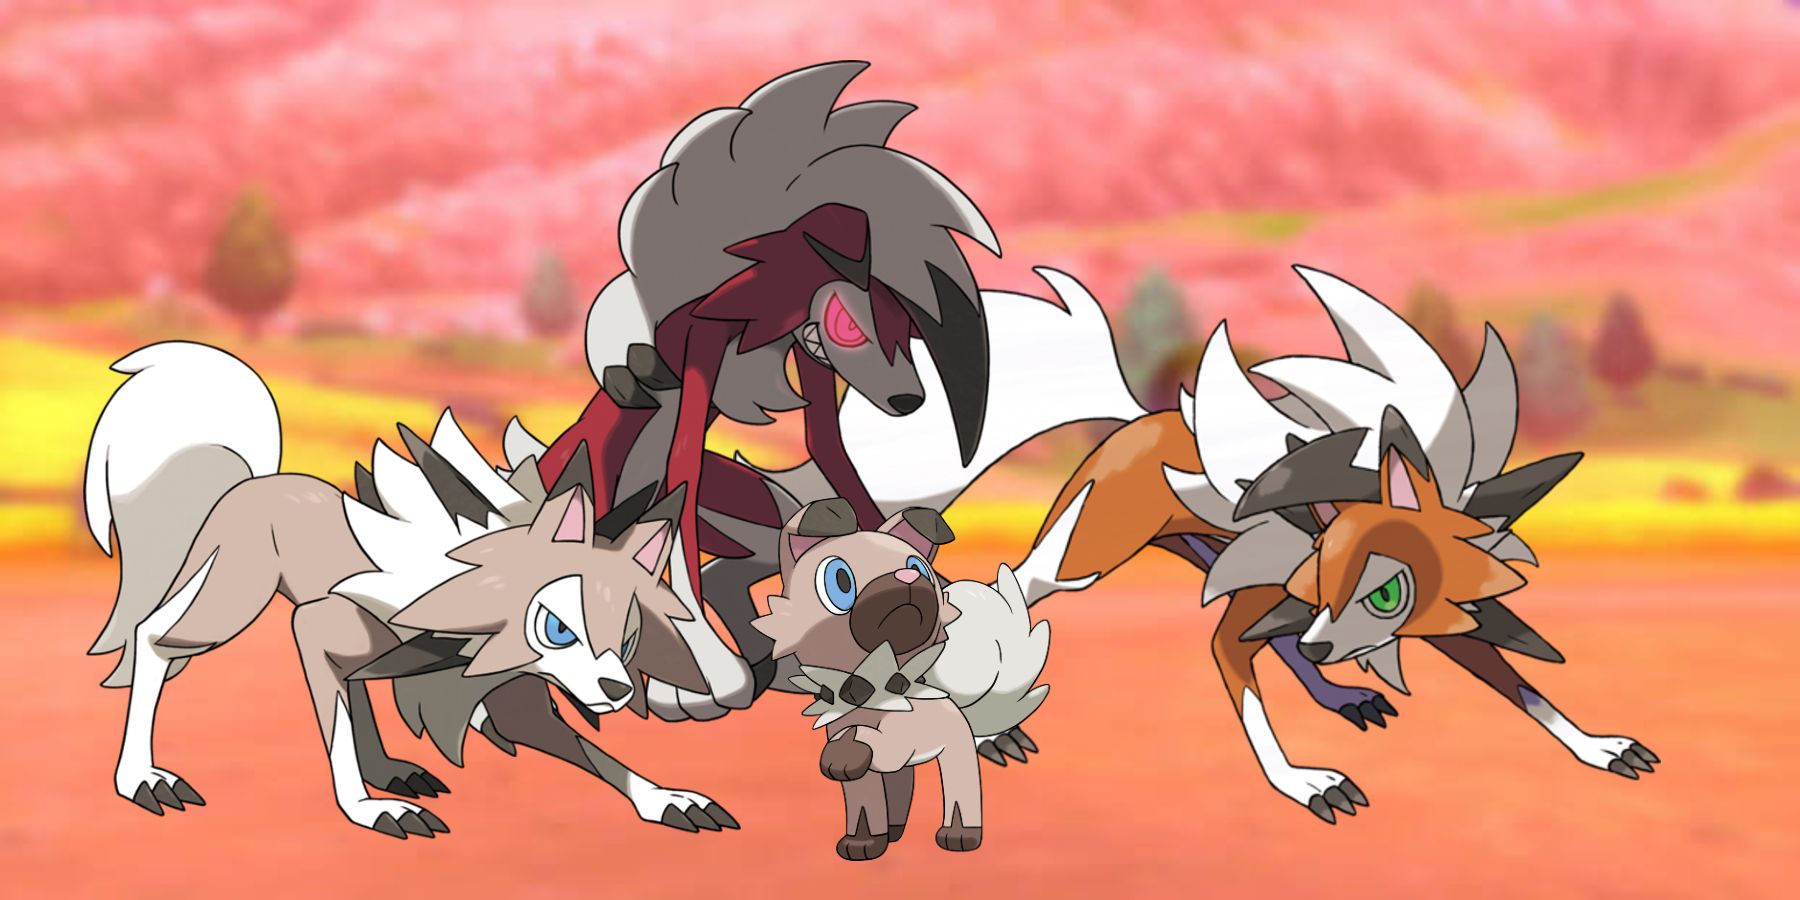 Pokemon's Rockruff with Lycanroc's three forms, including Midday, Dusk, and Night.